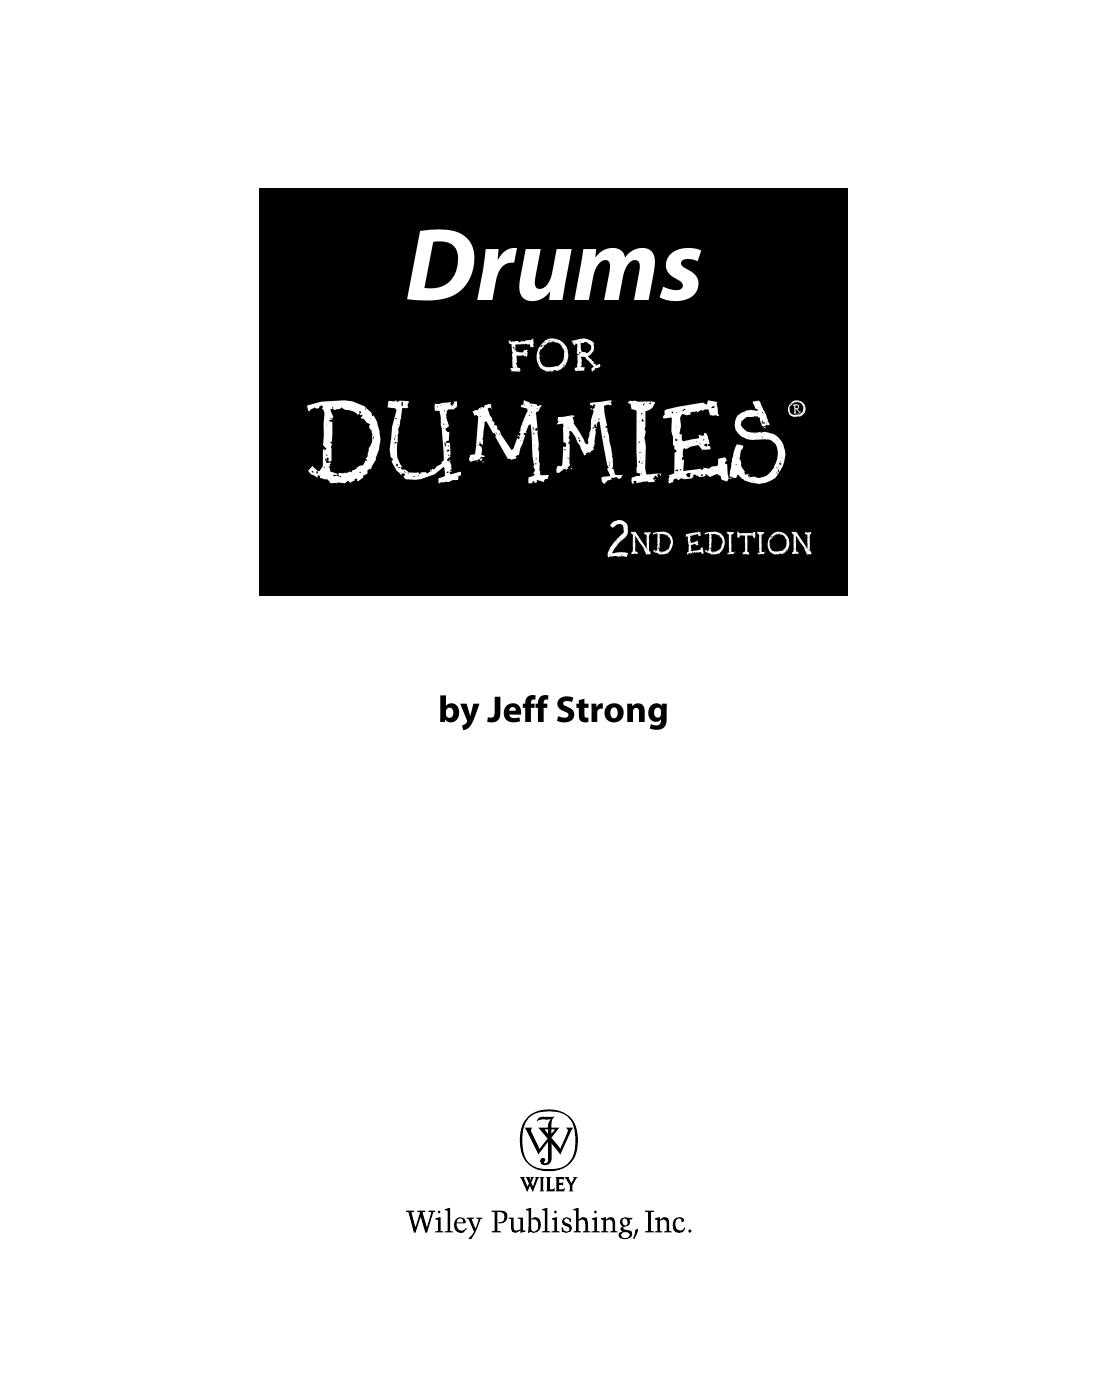 Drums For Dummies by Jeff Strong